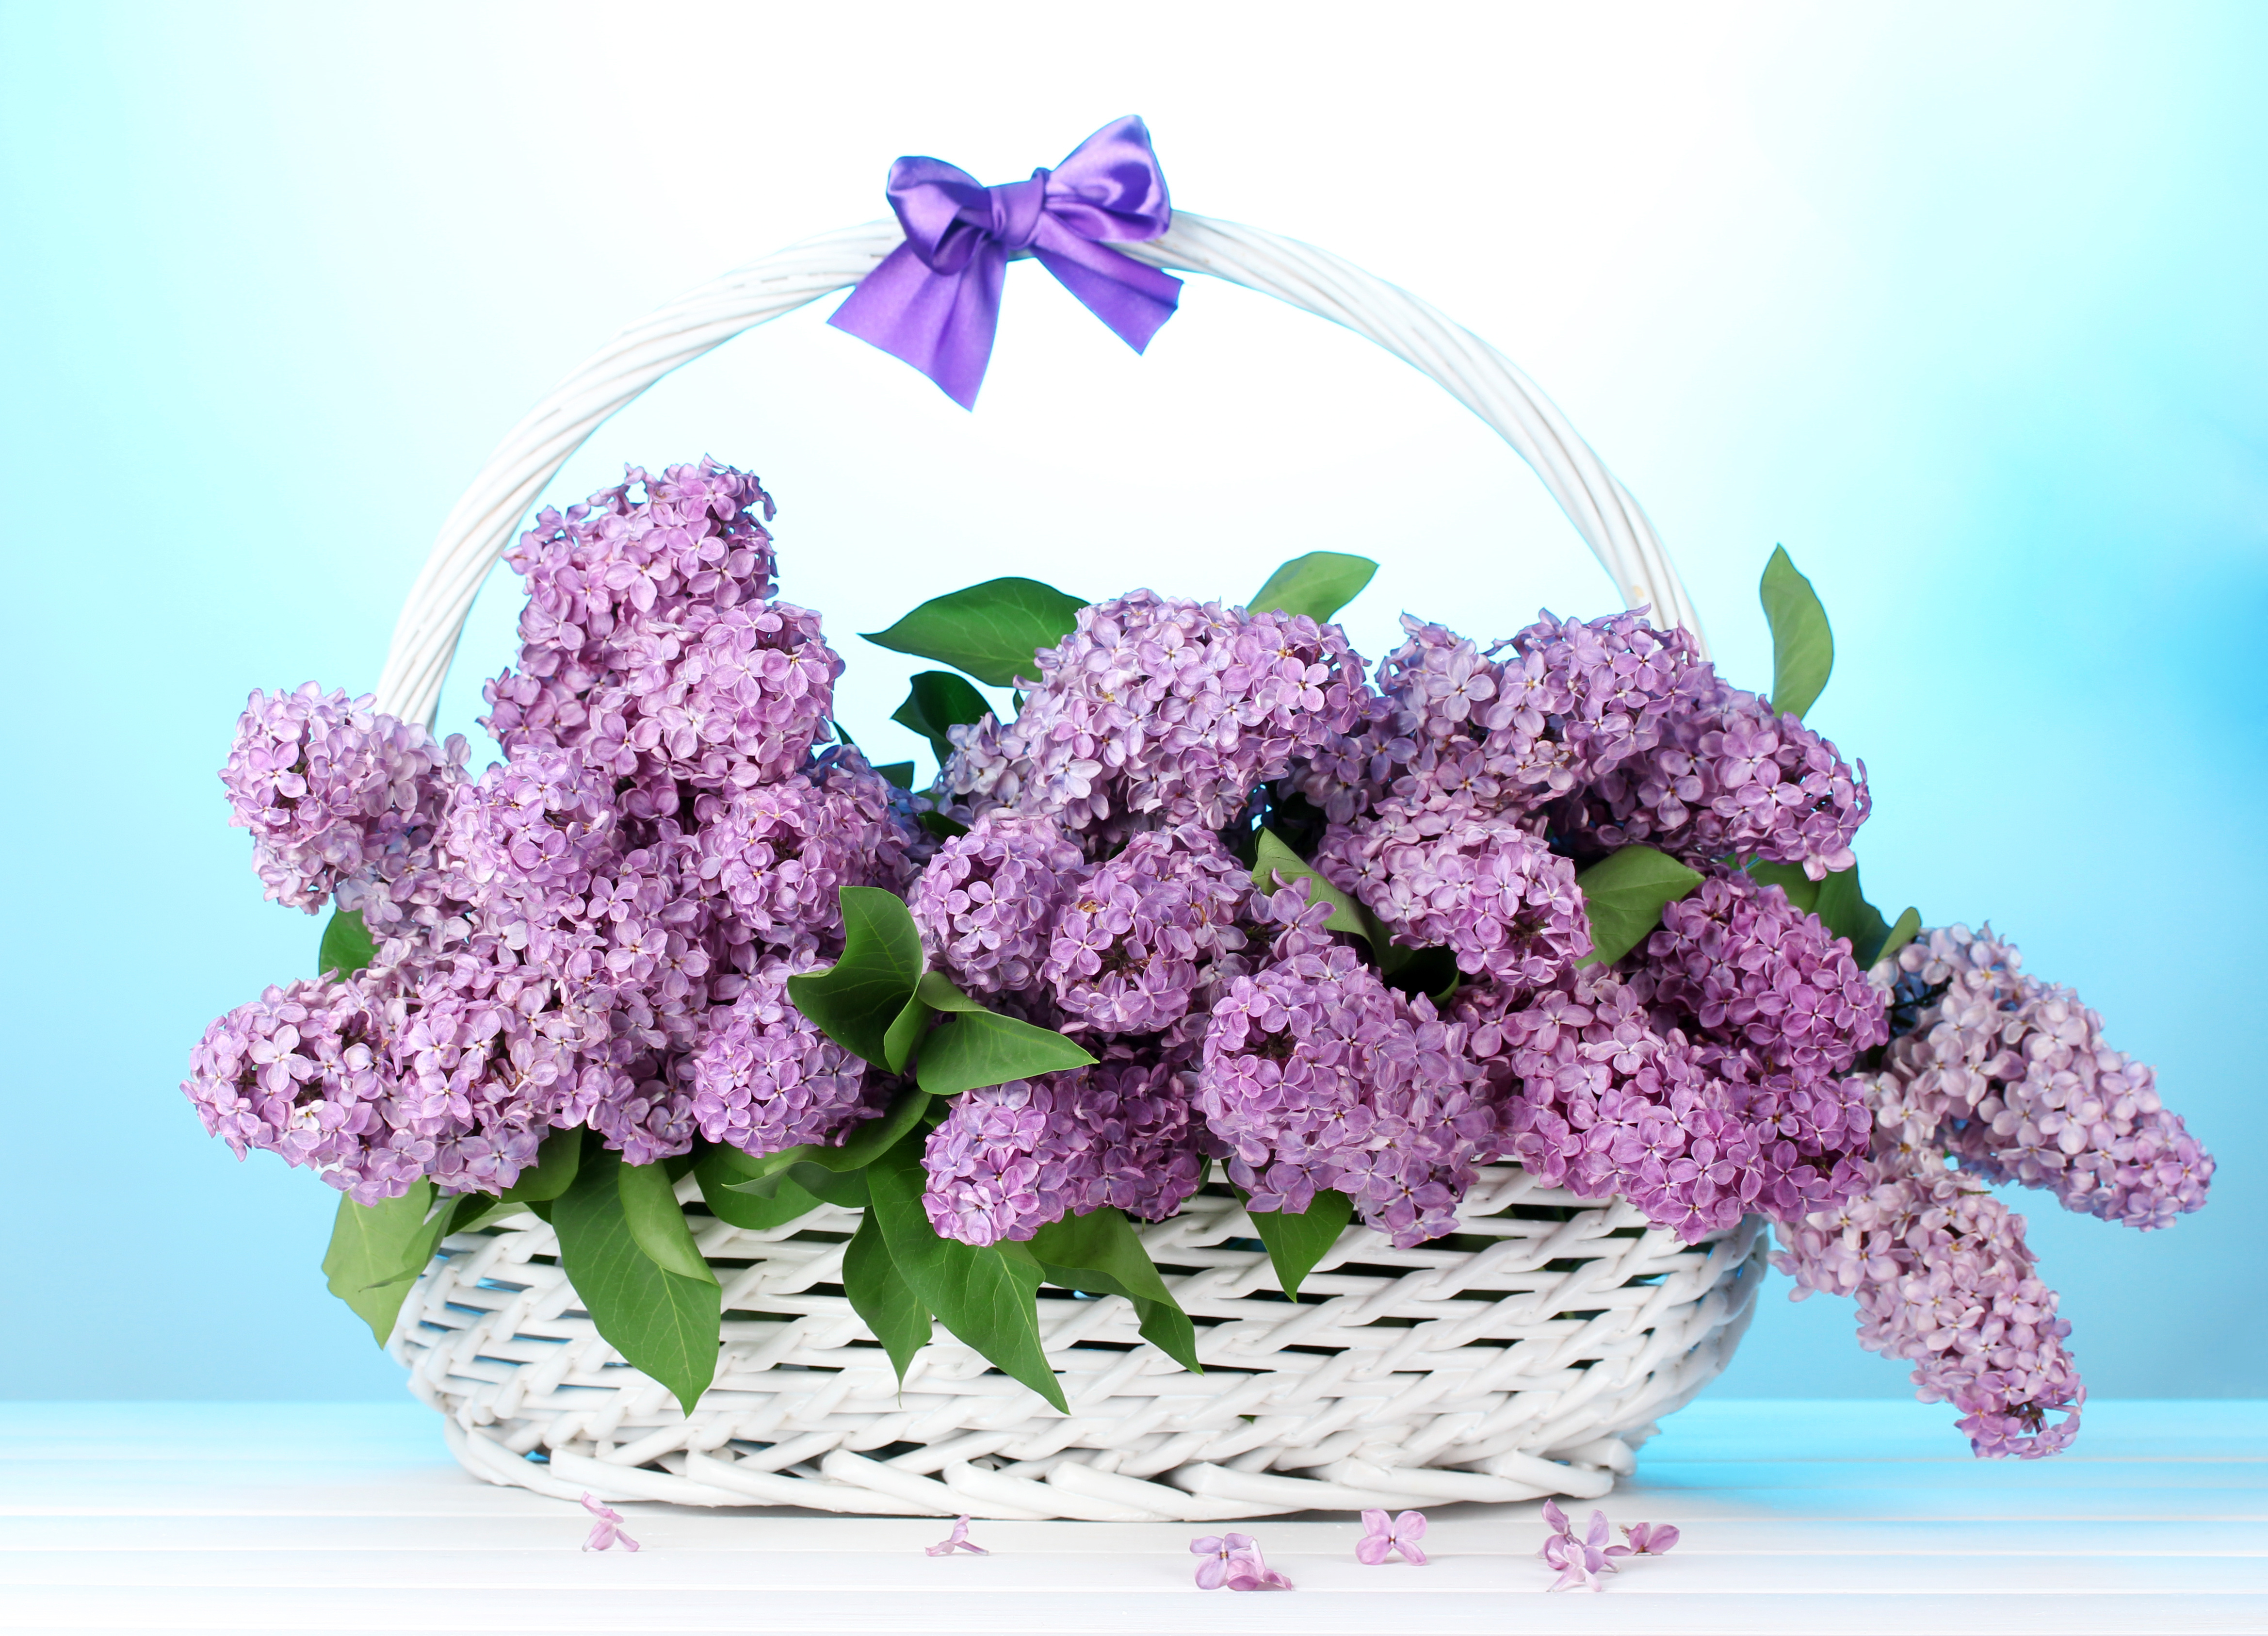 Wallpaper lilac flowers basket bow bunch wallpapers flowers 4676x3372